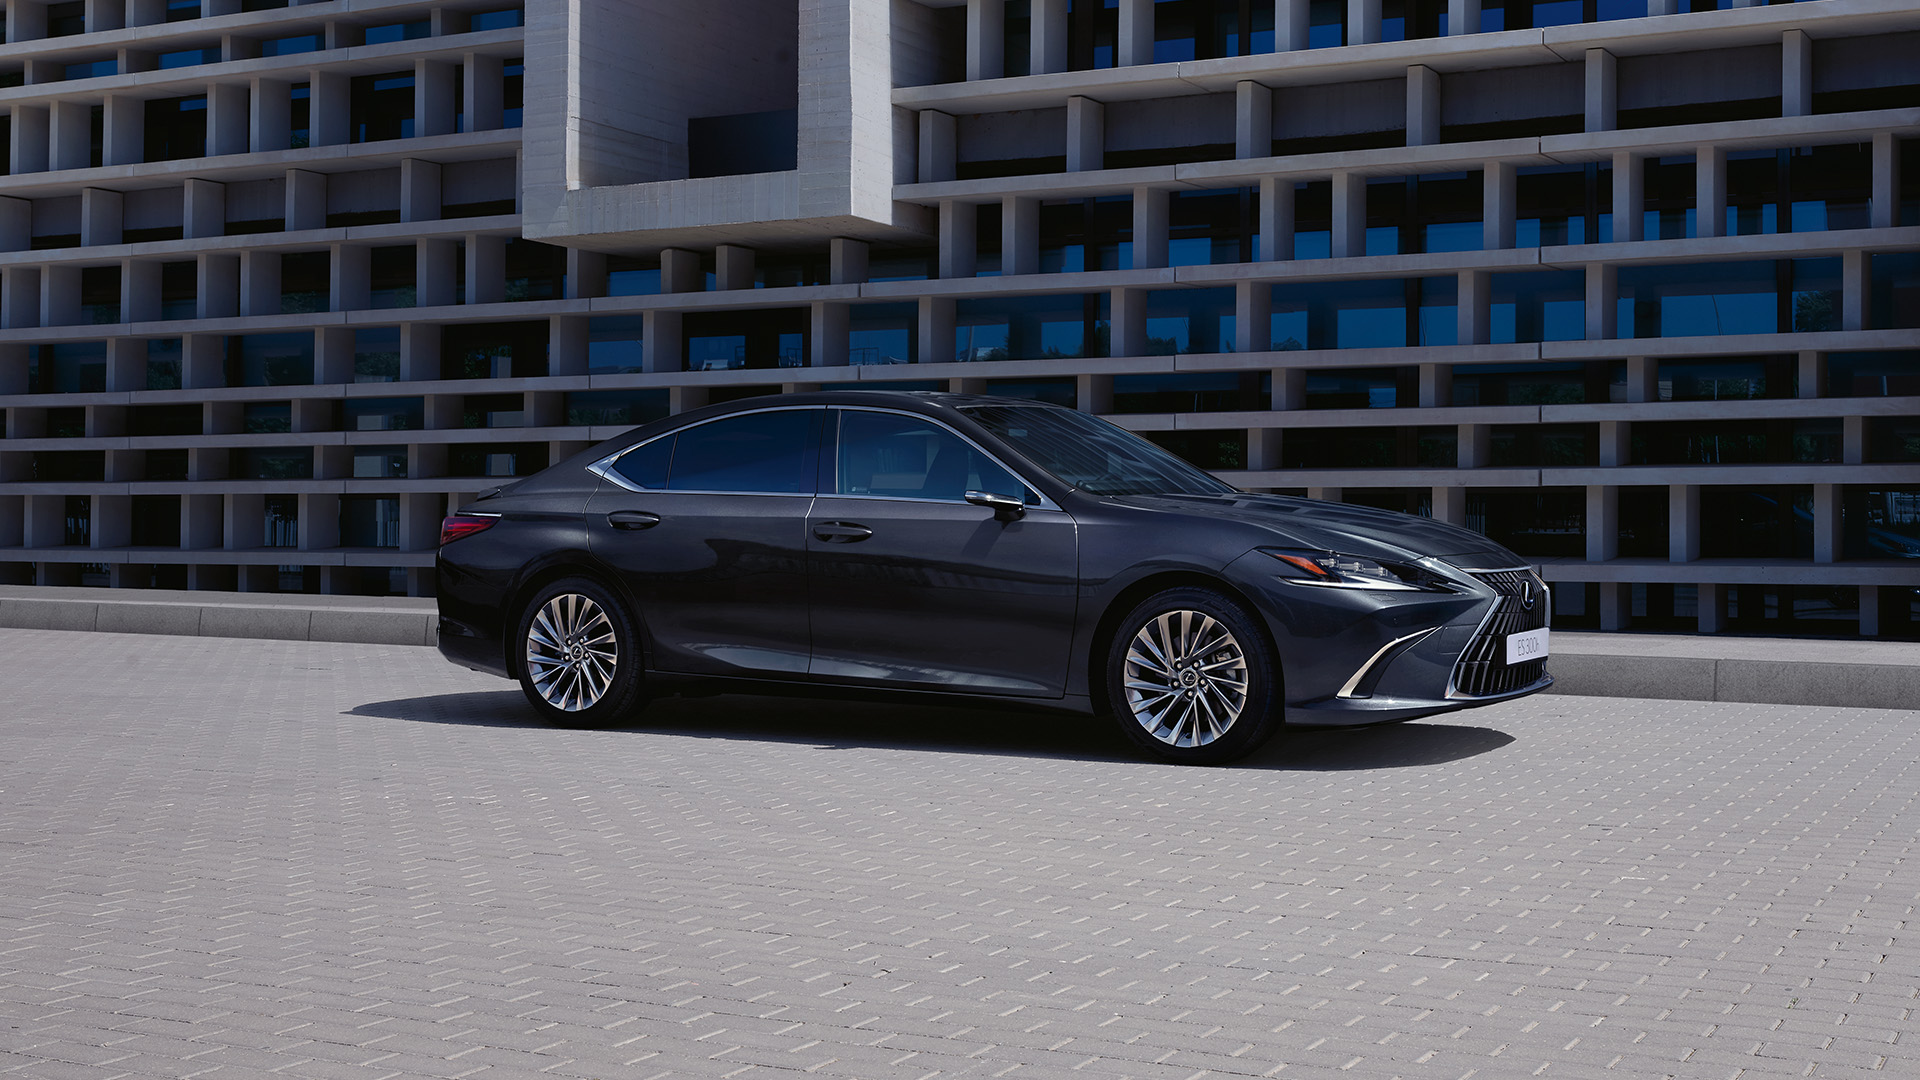 Side view of a Lexus ES parked outside a building 